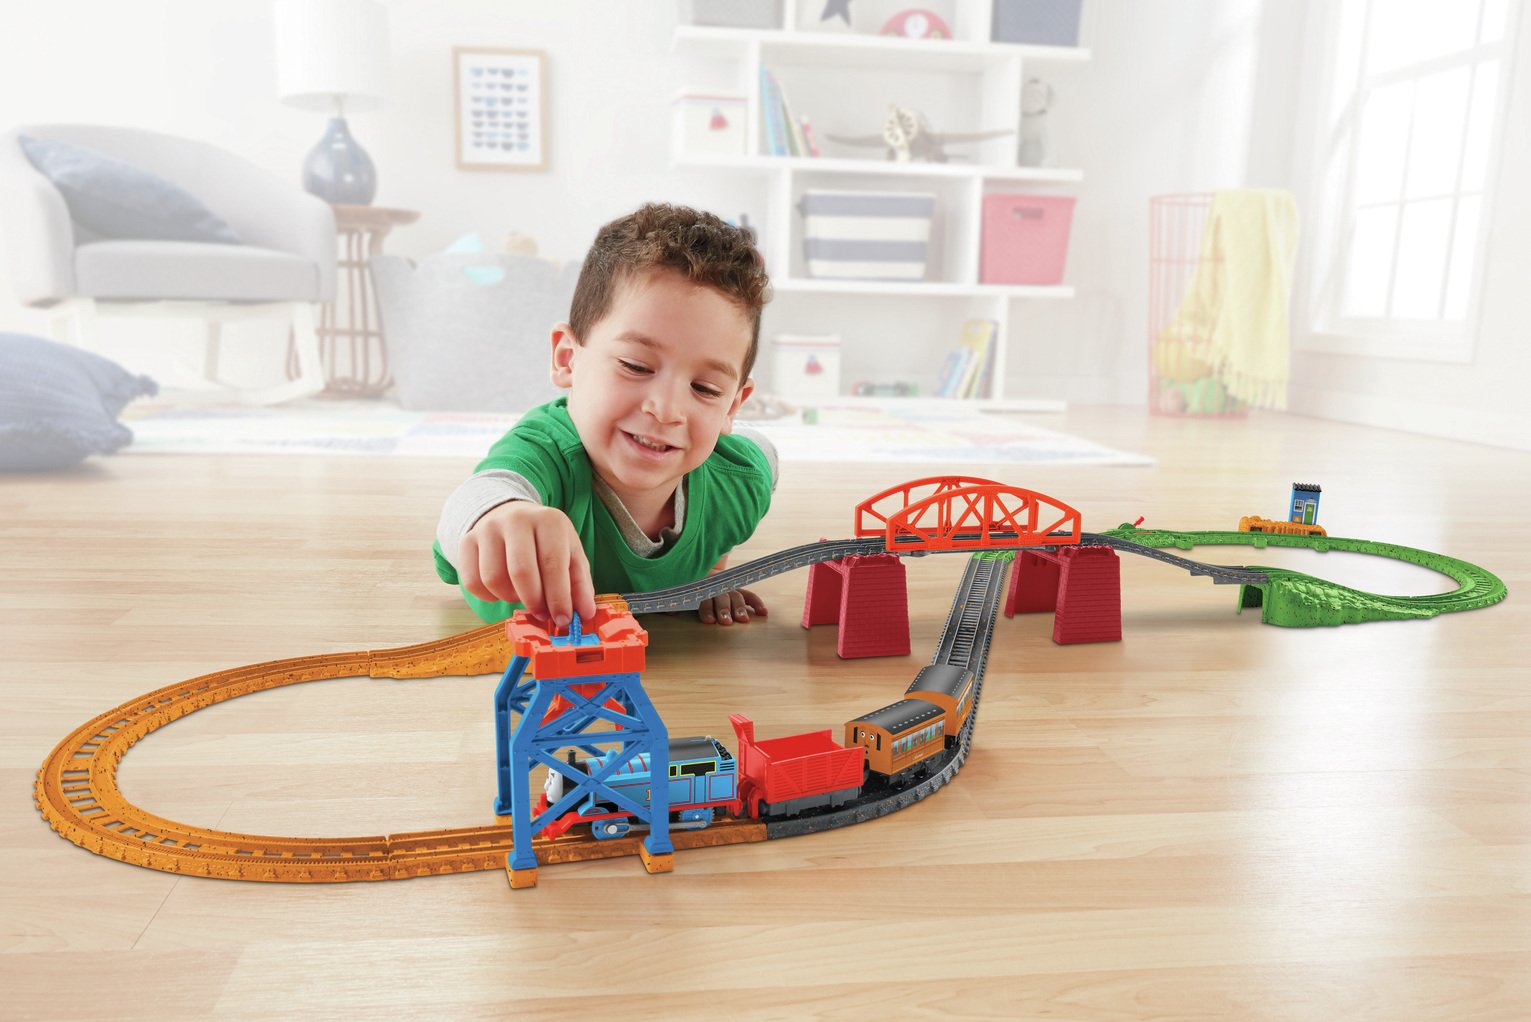 Thomas & Friends 3-in-1 Playset Review